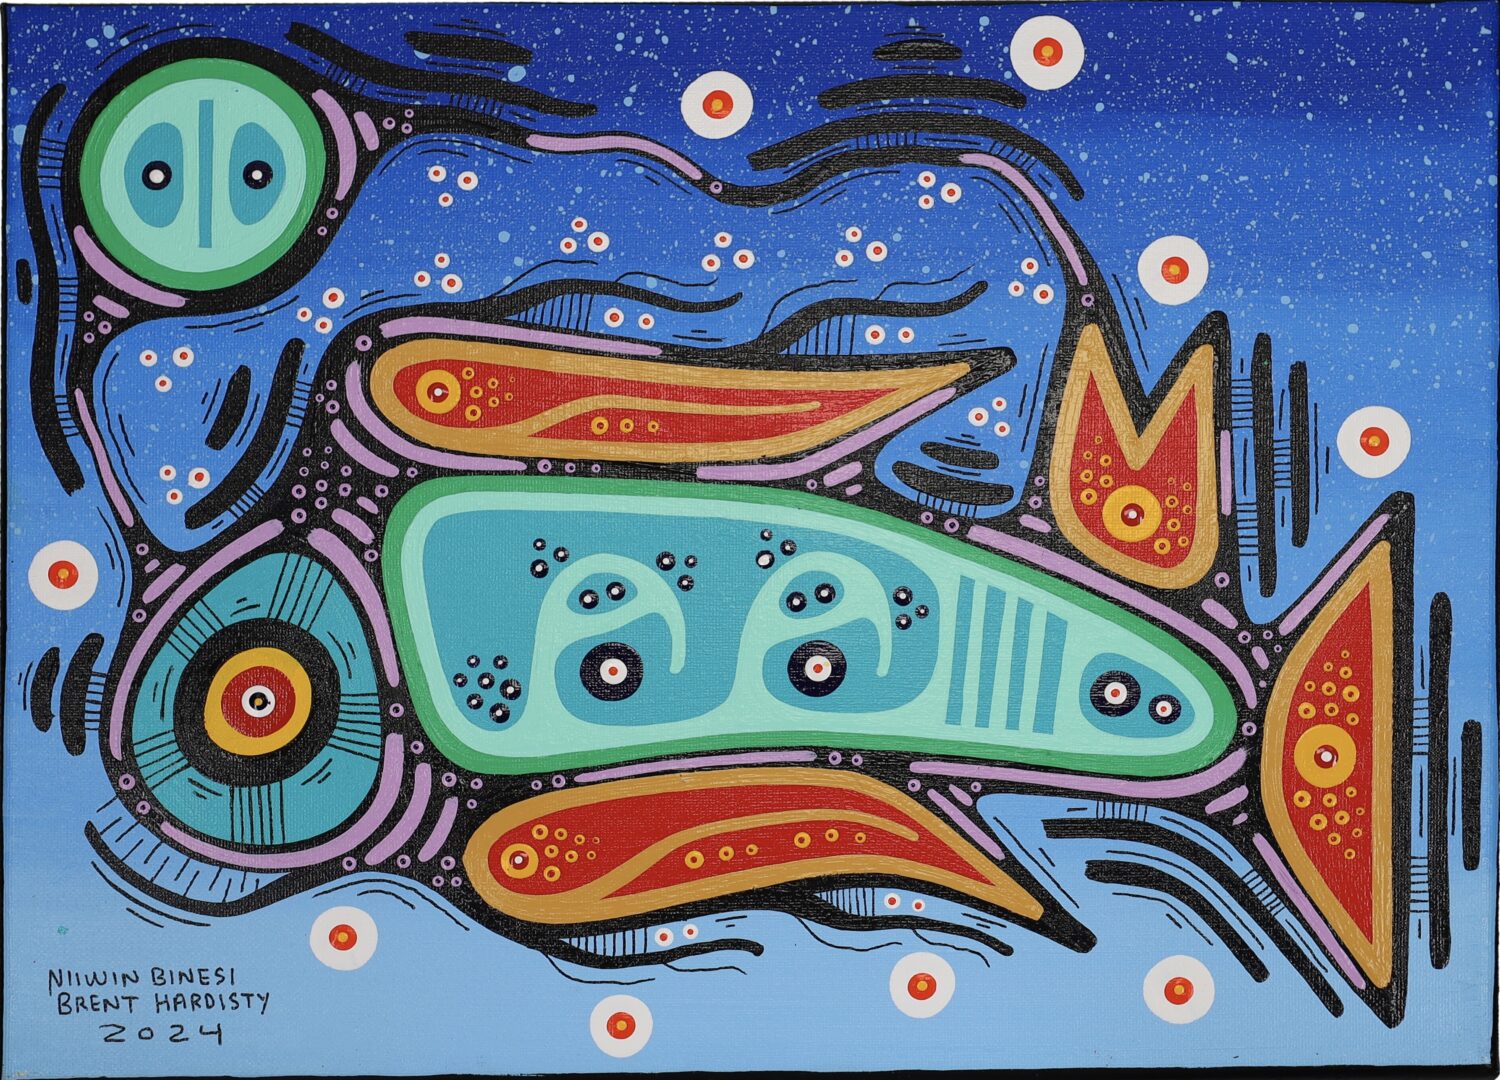 One original painting by Anishinaabe artist, Brent Hardisty. One ___ painting on canvas depicting a mystical fish.